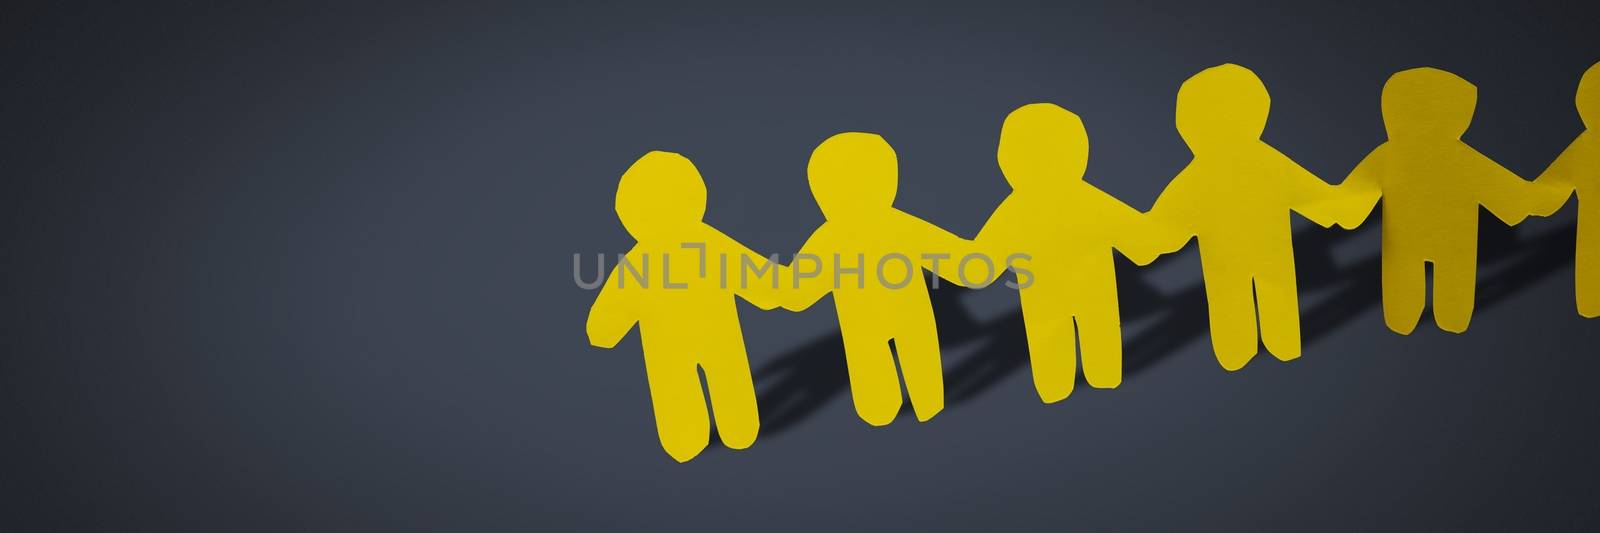 Digital composite of Paper cut out people holding hands together in line